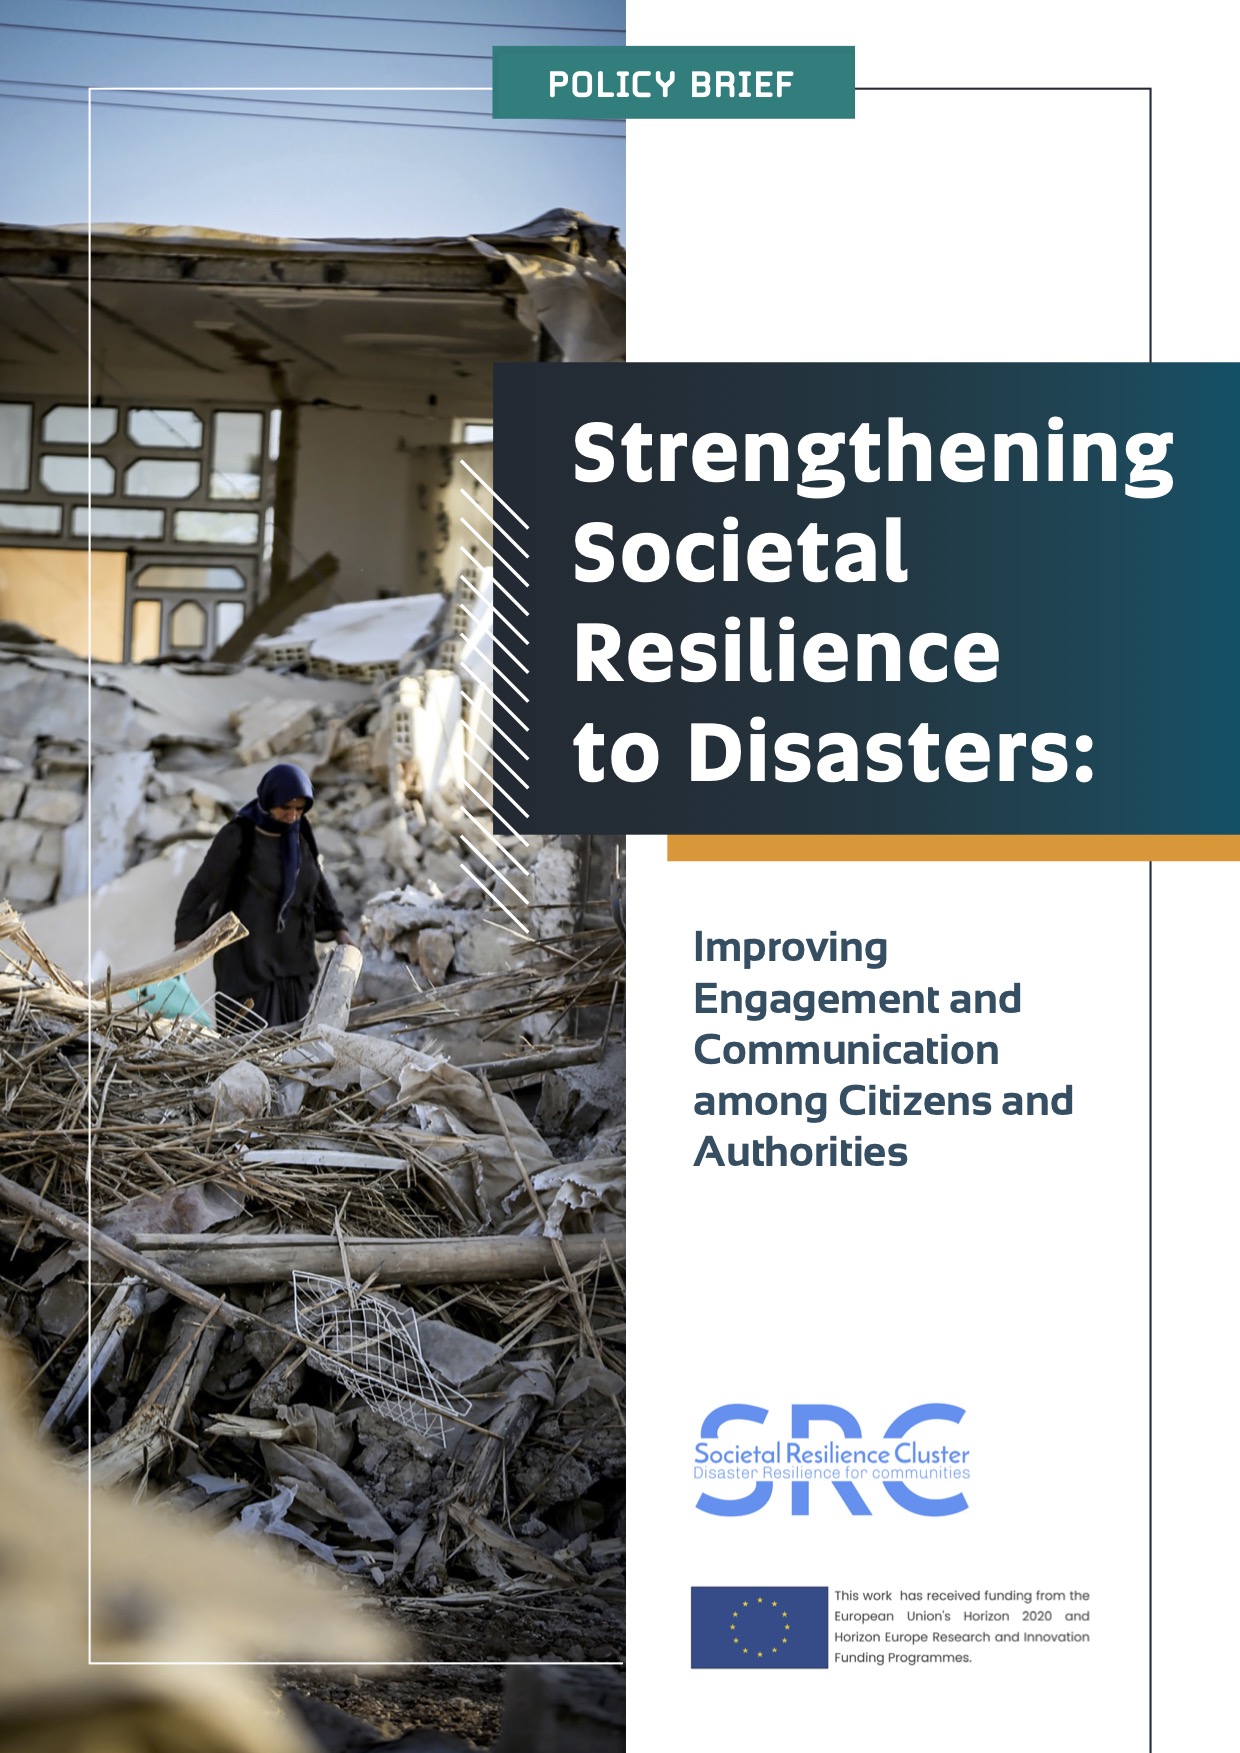 Cover page of the Policy Brief named "Strengthening Societal Resilience to Disasters: Improving Engagement and Communication among Citizens and Authorities"